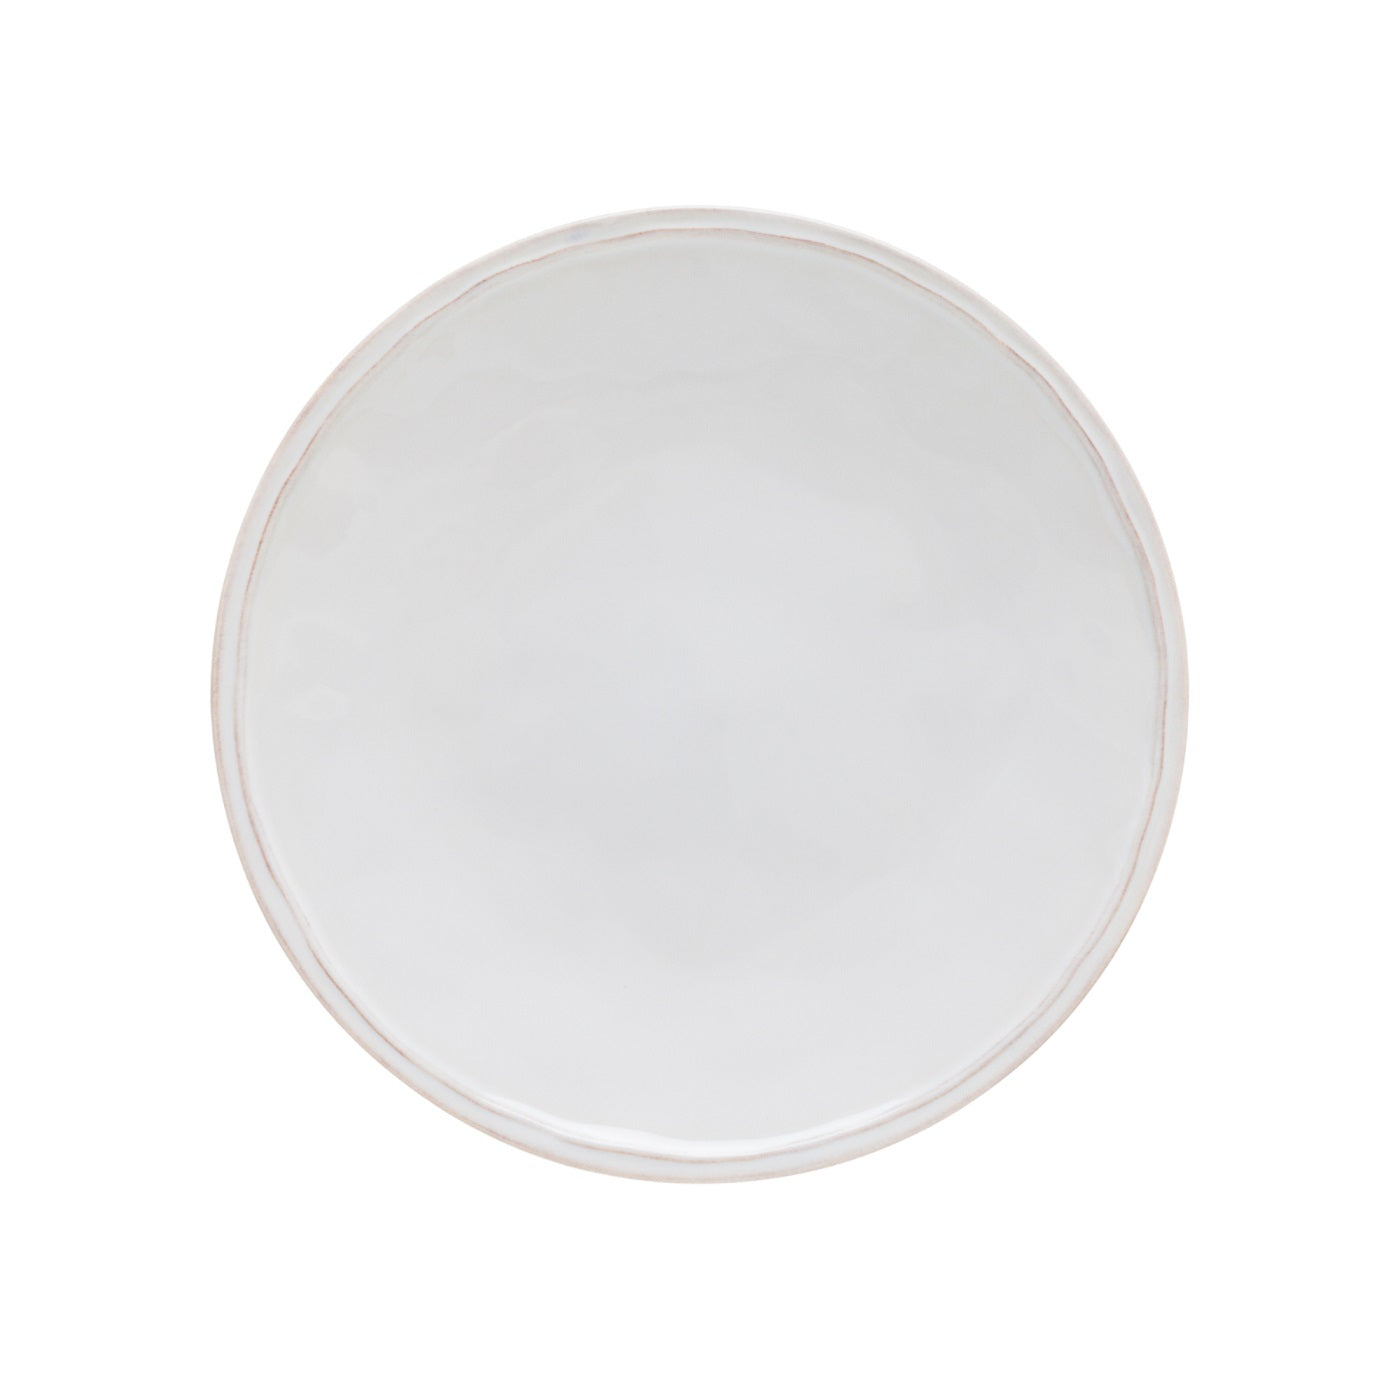 Pearly white dinner plate with raised circular border. 